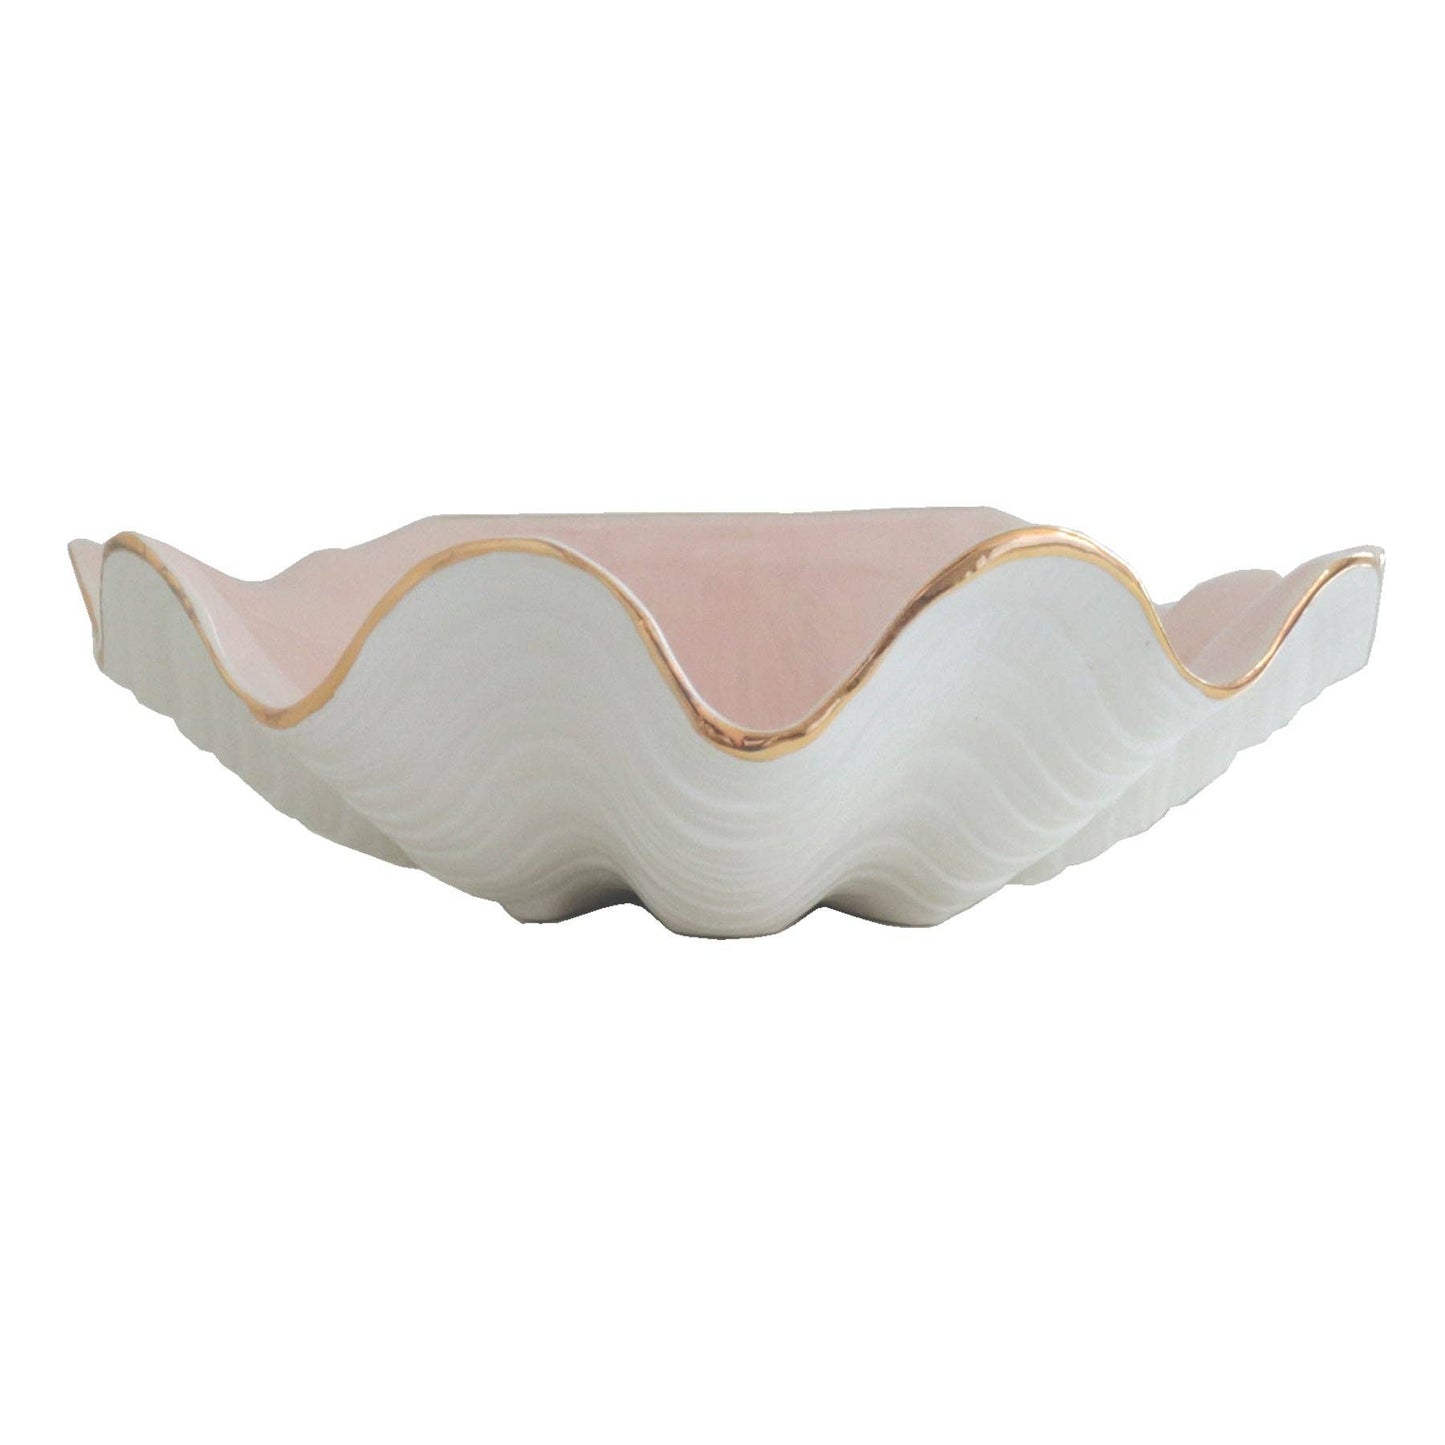 Clam Shell Bowl with 22K Gold Accent: Large / Coral